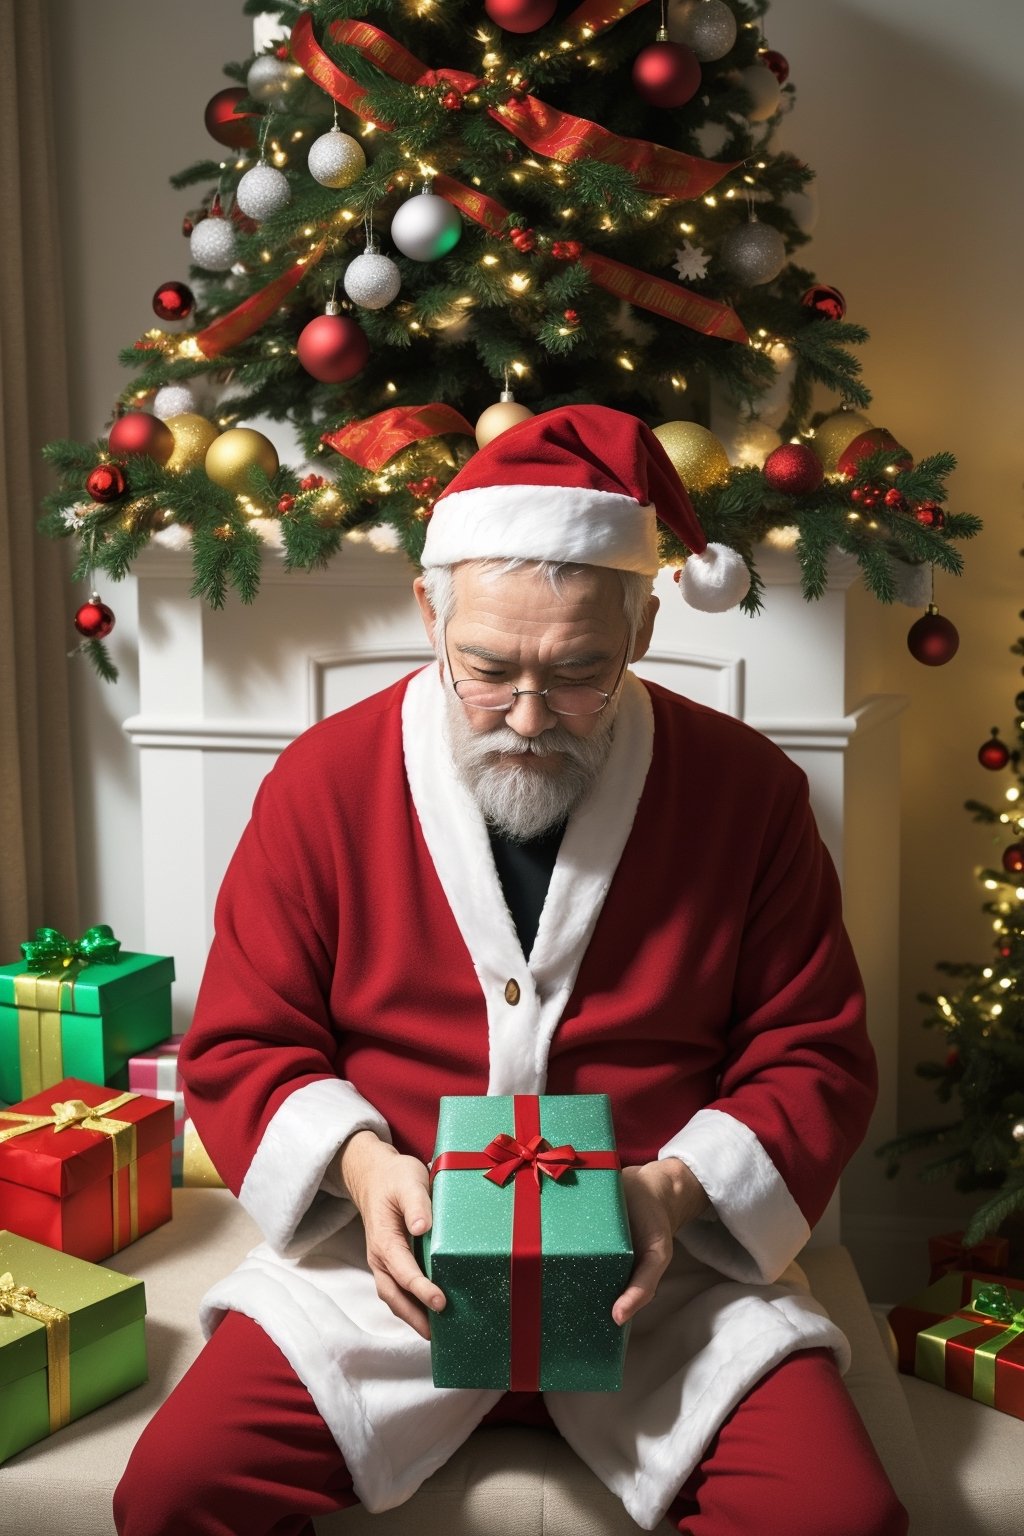 masterpiece, 8k, raw, 50yo Santa Claus ,boring , eyes closed, exhusted from decorating living room with Christmas decors, christmas tree, ribbon, christmas cards, presents, extreme festive,